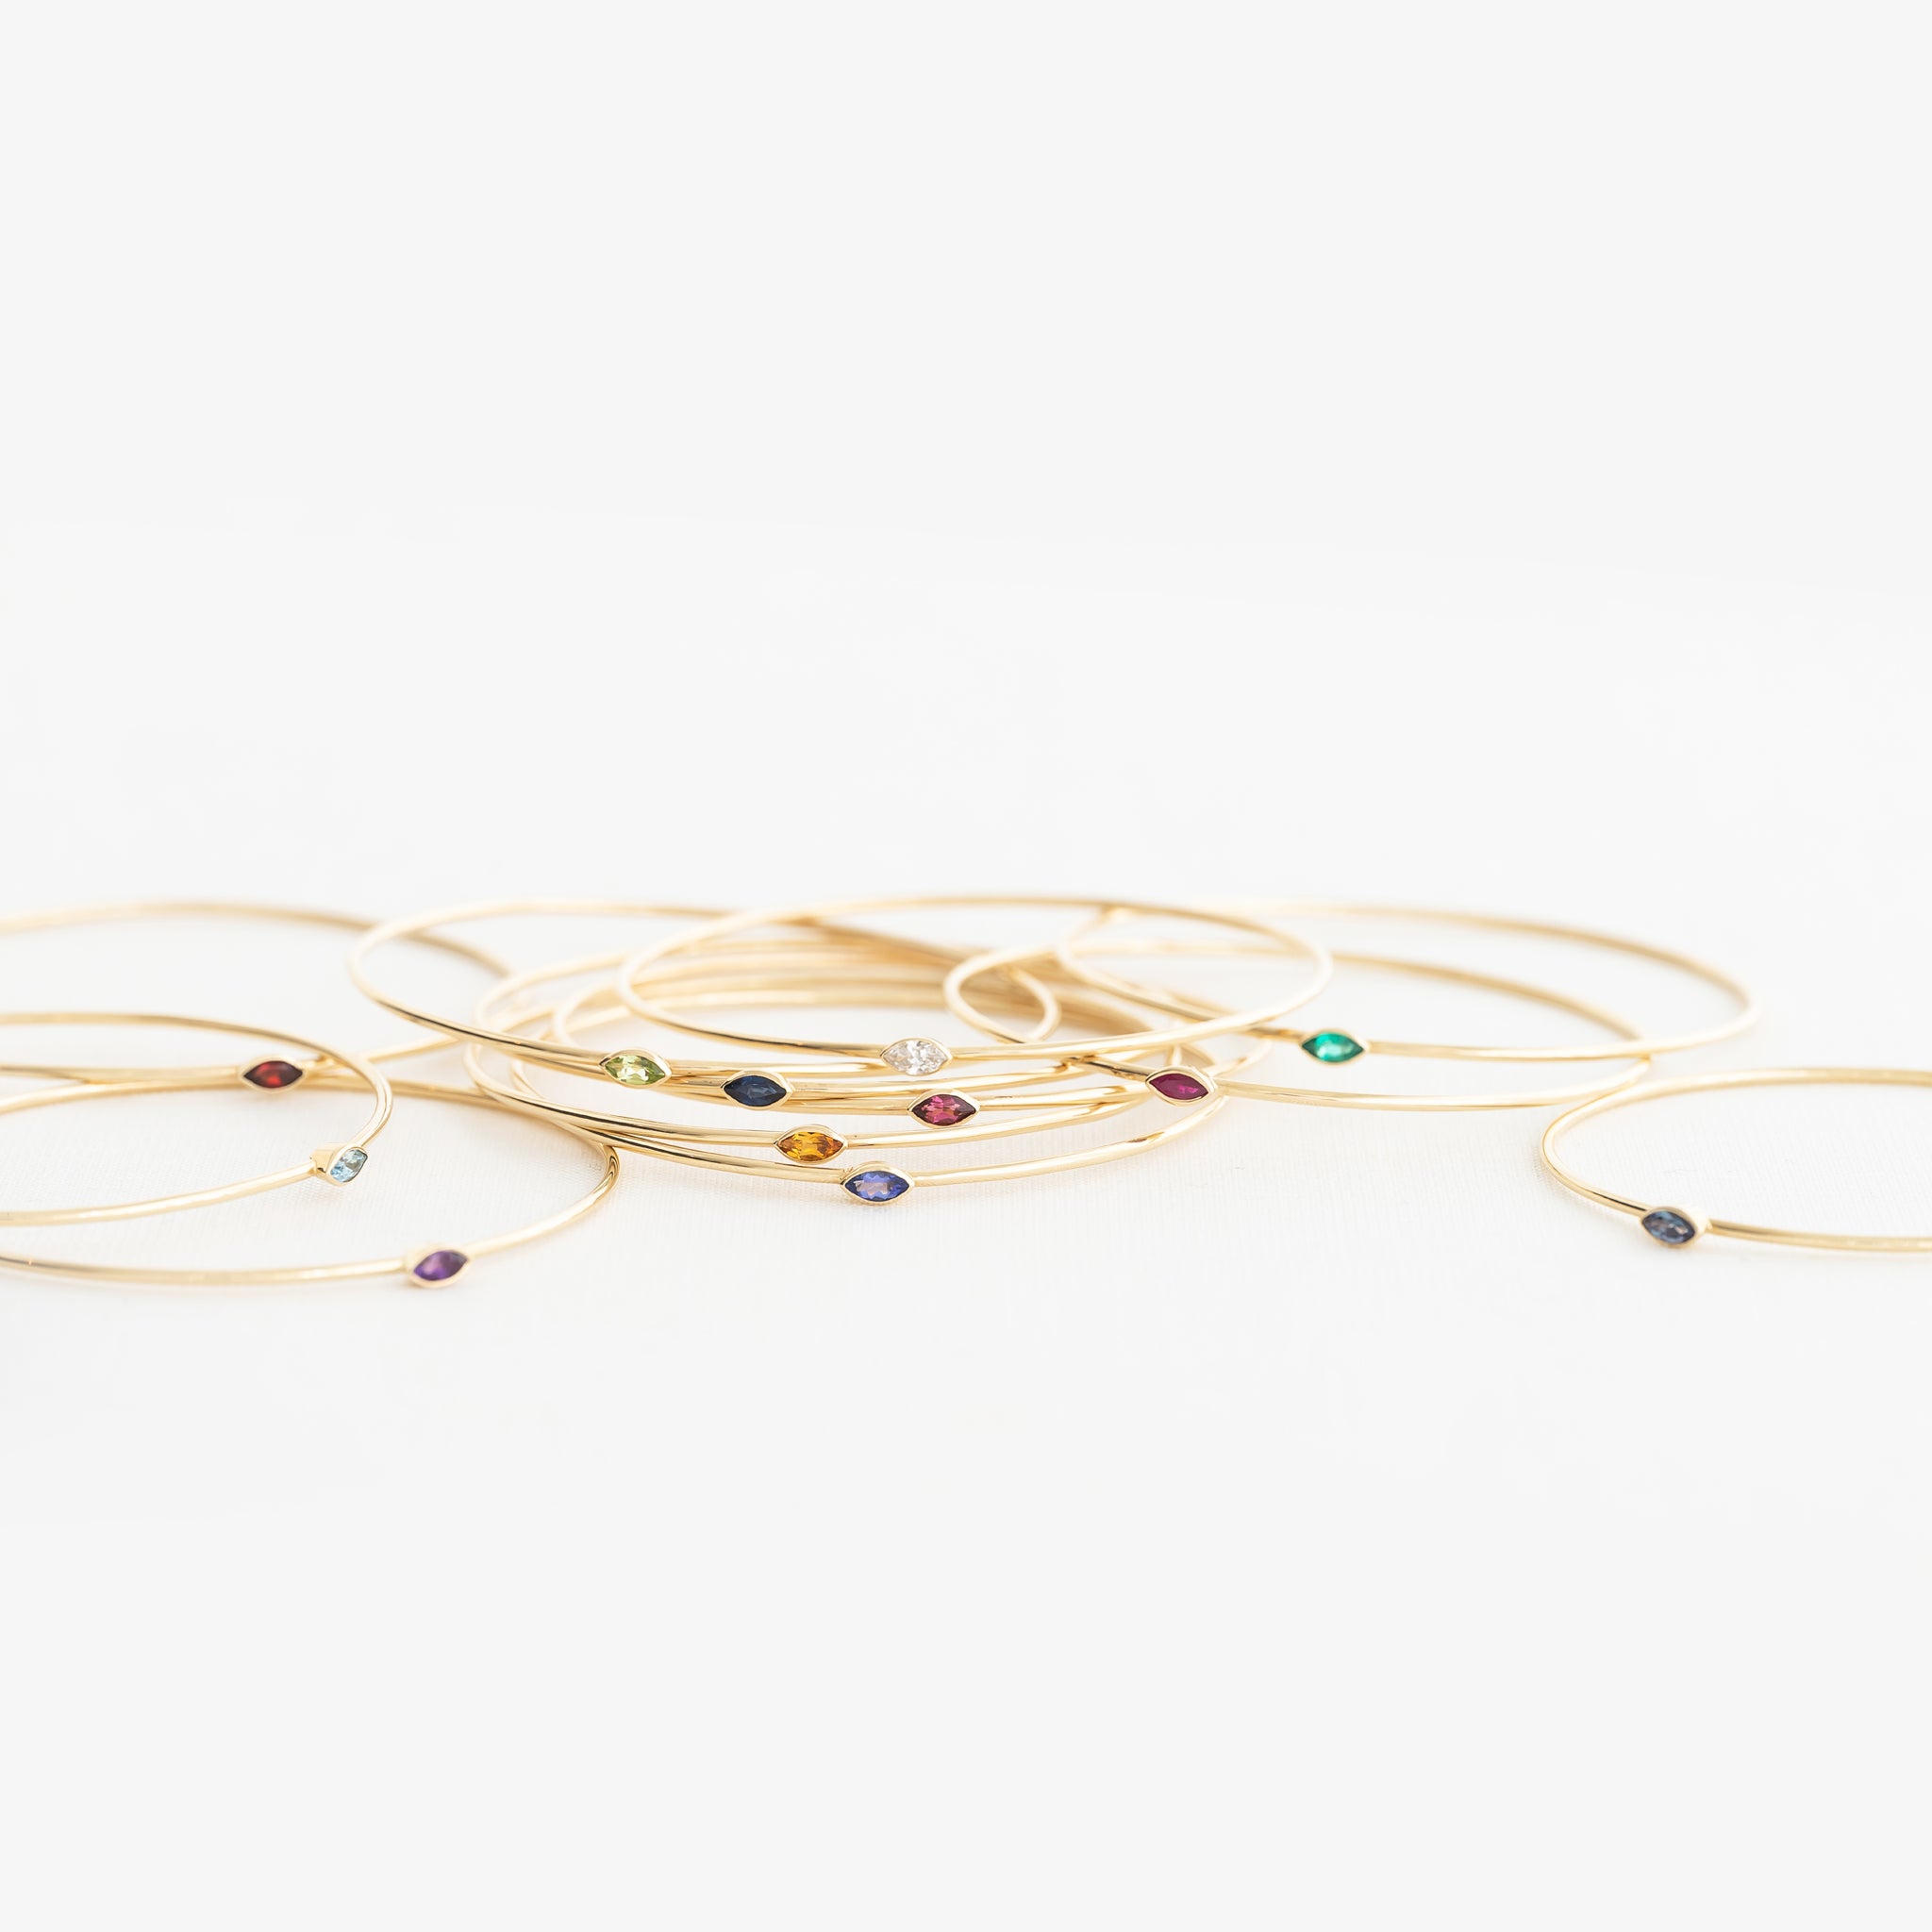 The Birthstone Bangle Collection